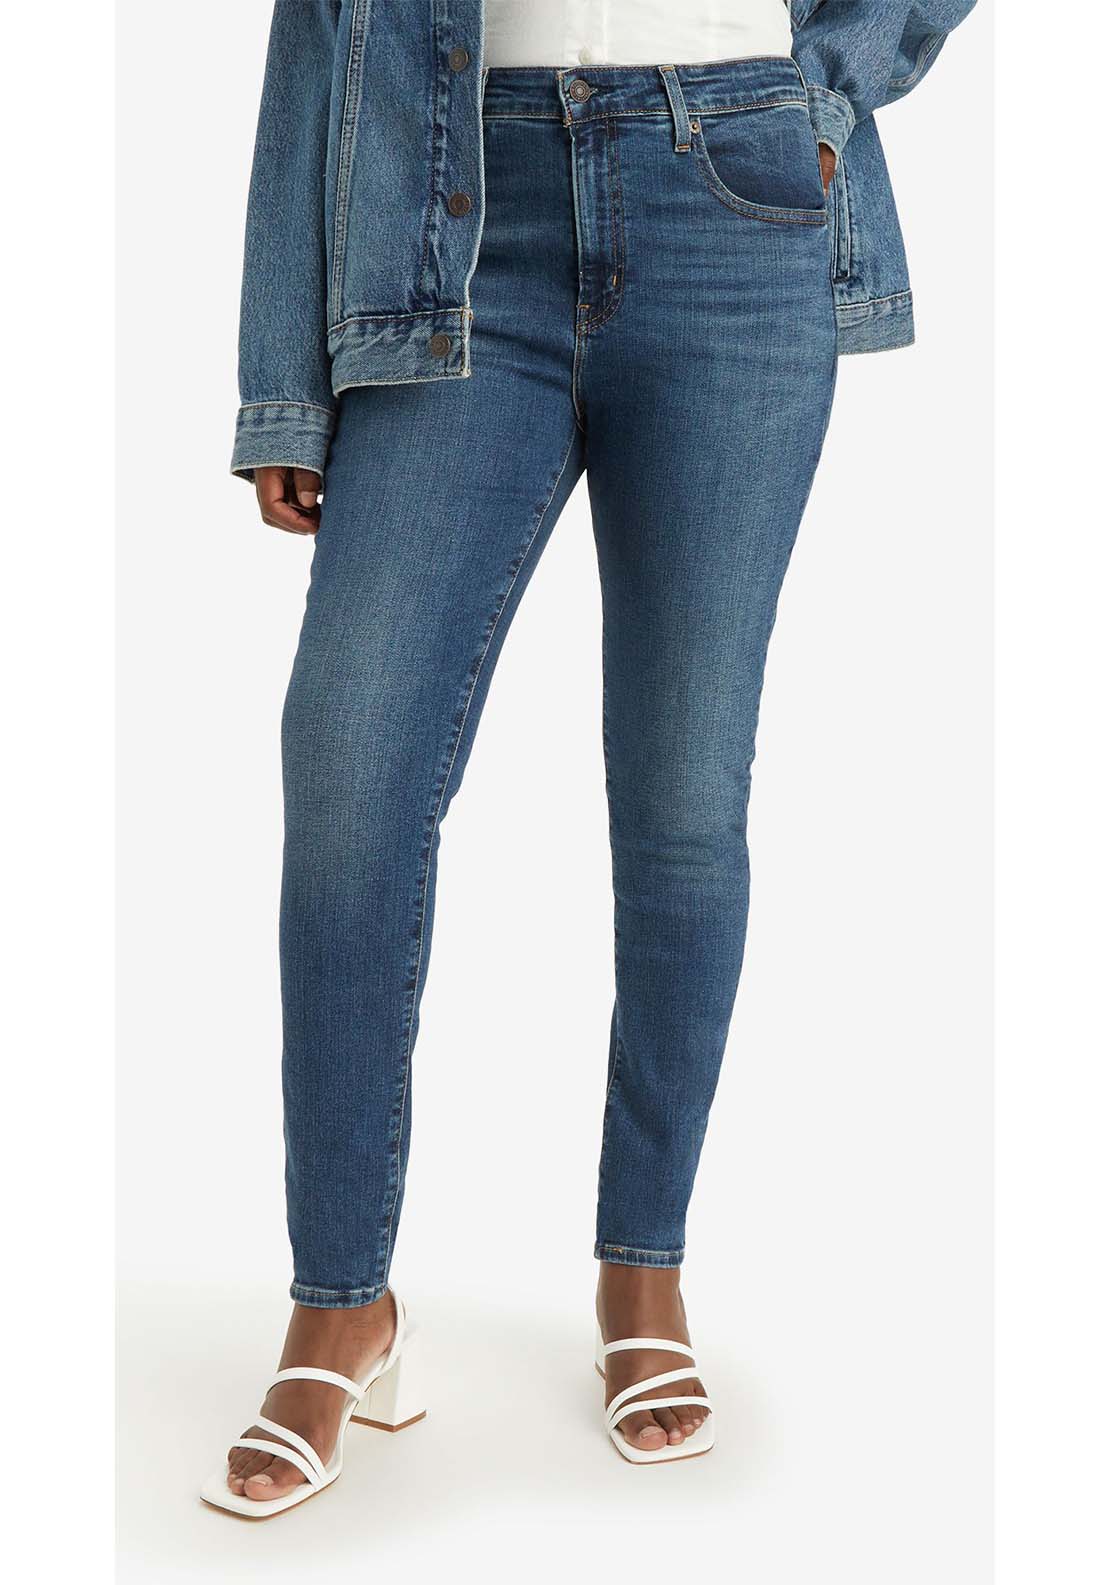 Levis 721 High Rise Skinny Jean 5 Shaws Department Stores